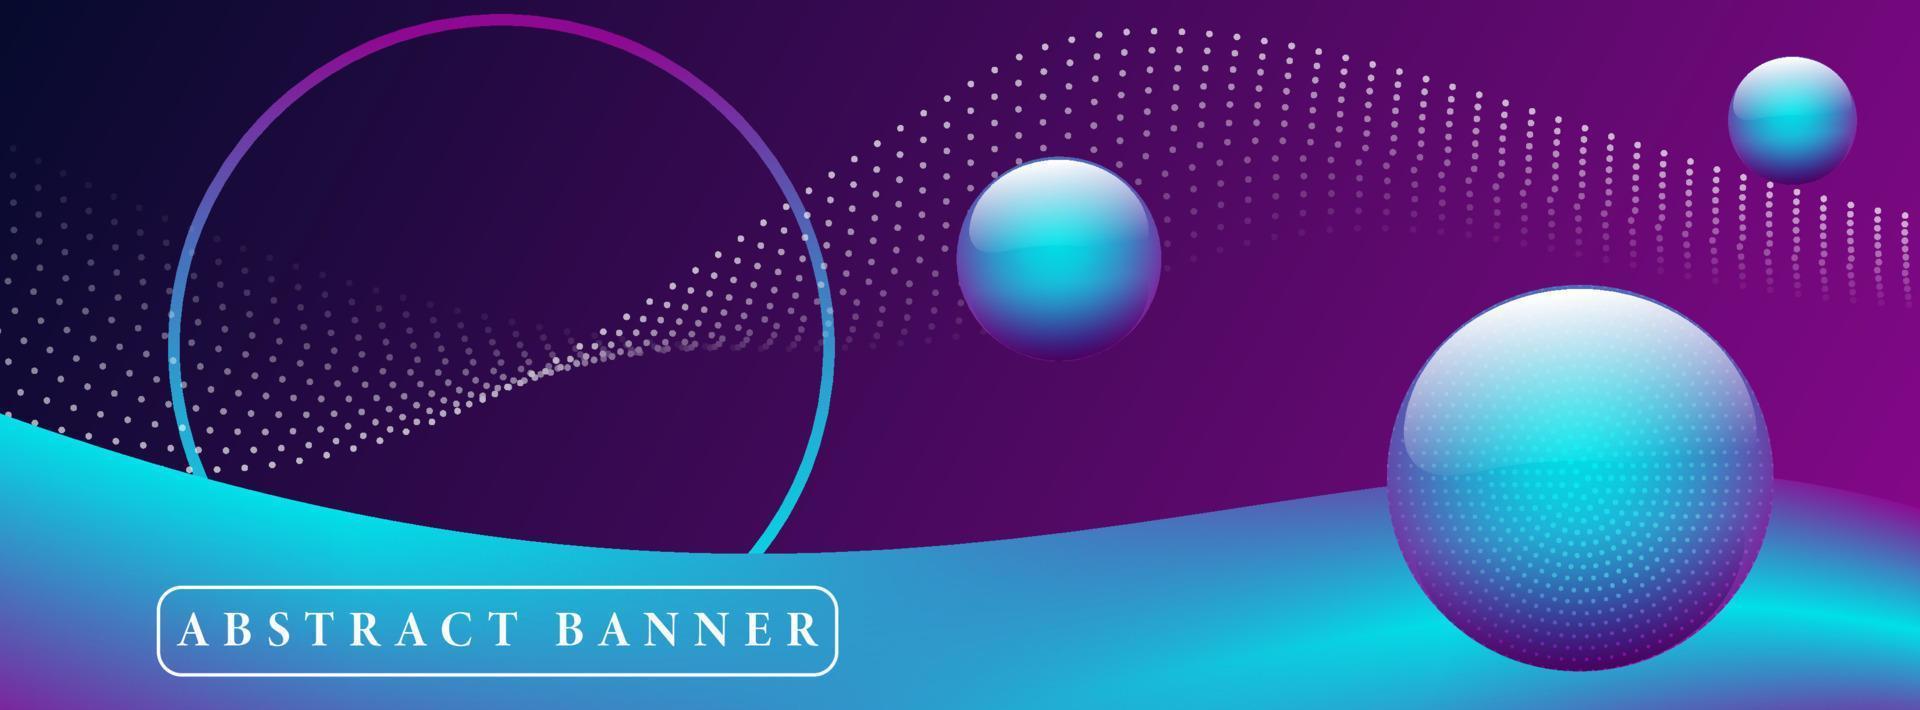 wide abstract banner created with 3D wave 3D balls and circle shape with stardust wave on background vector